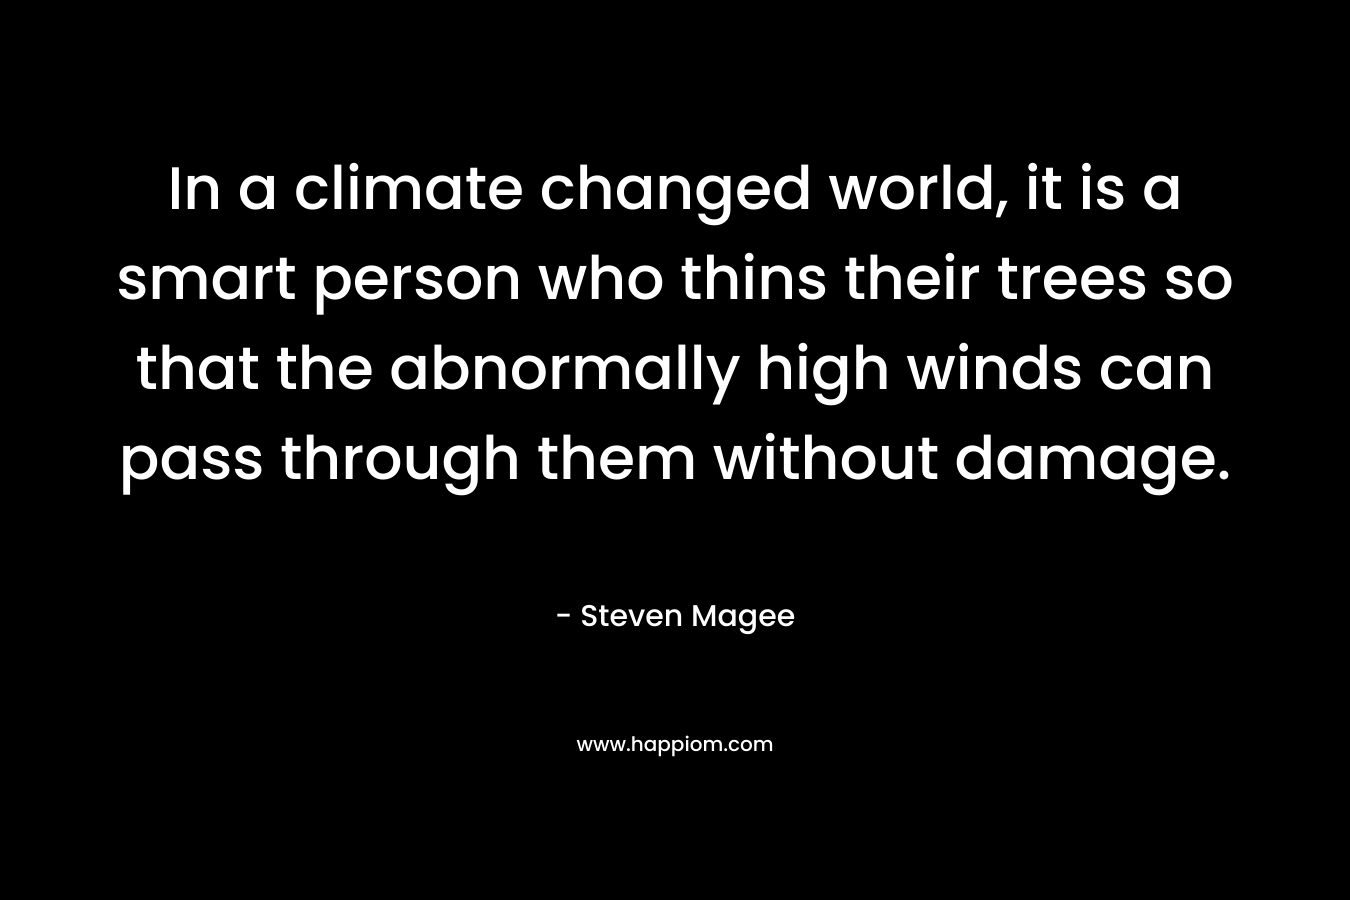 In a climate changed world, it is a smart person who thins their trees so that the abnormally high winds can pass through them without damage.